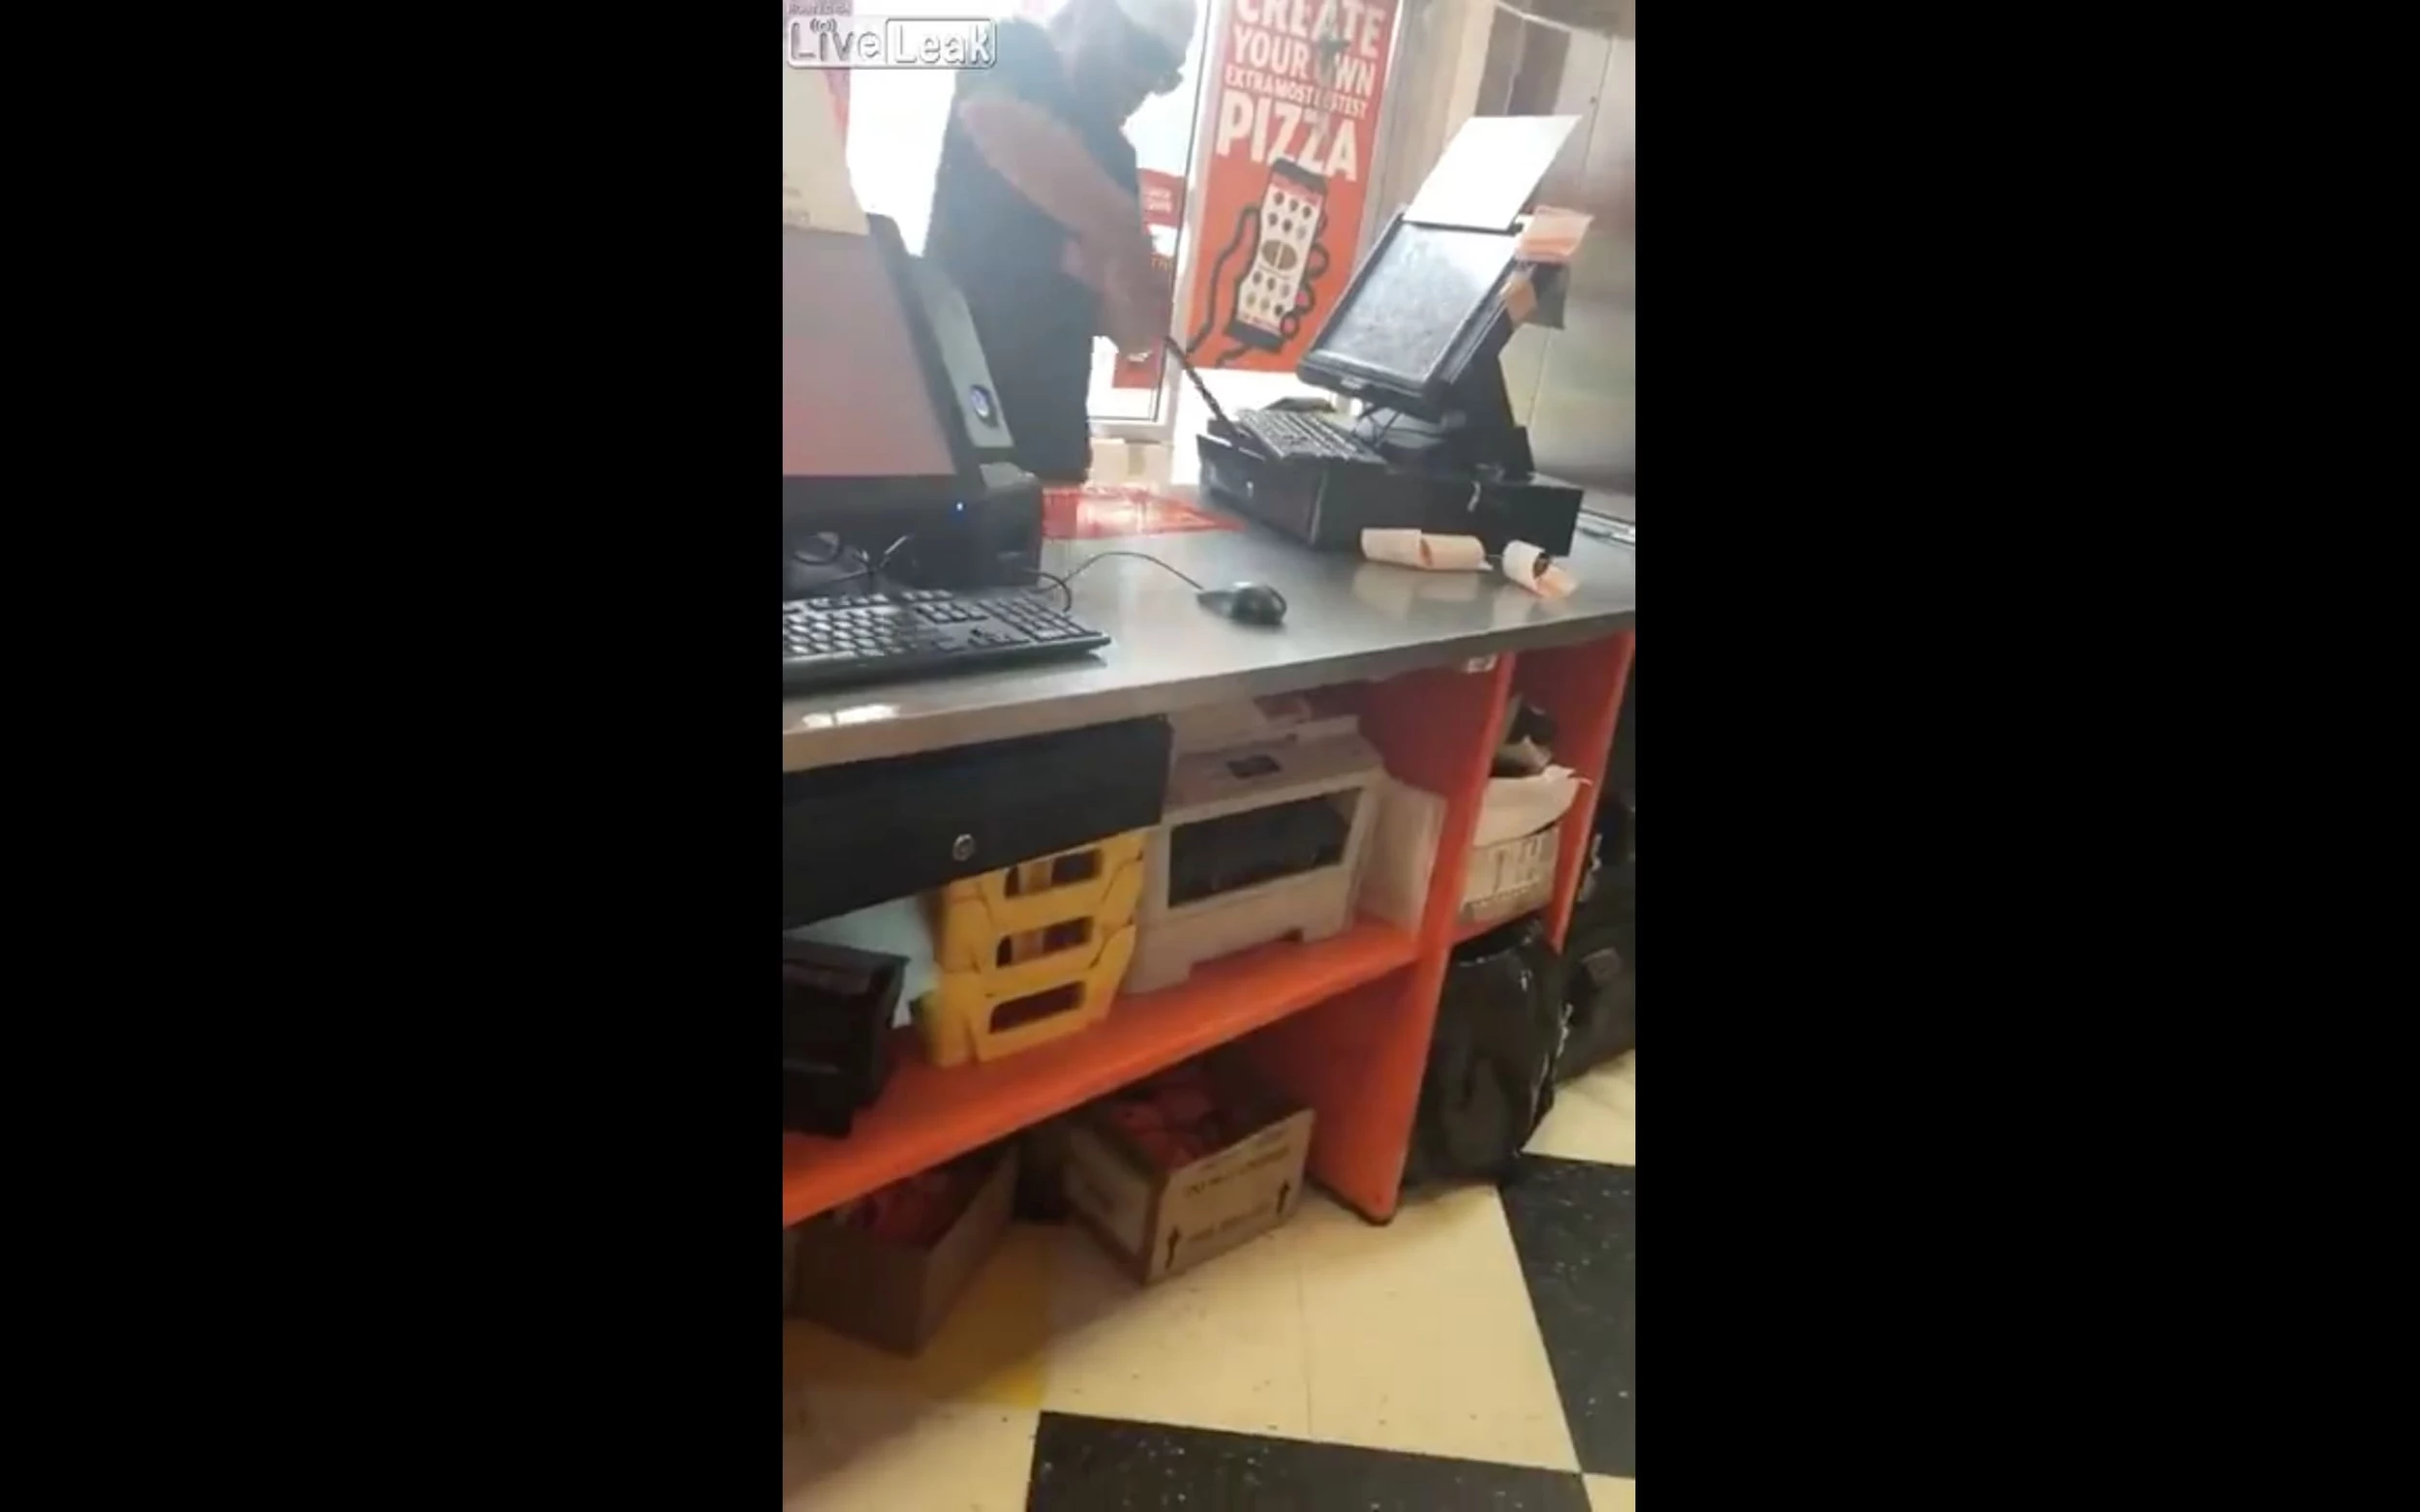 Little Caesars Staff Critiques Robbers As They're Being Robbed